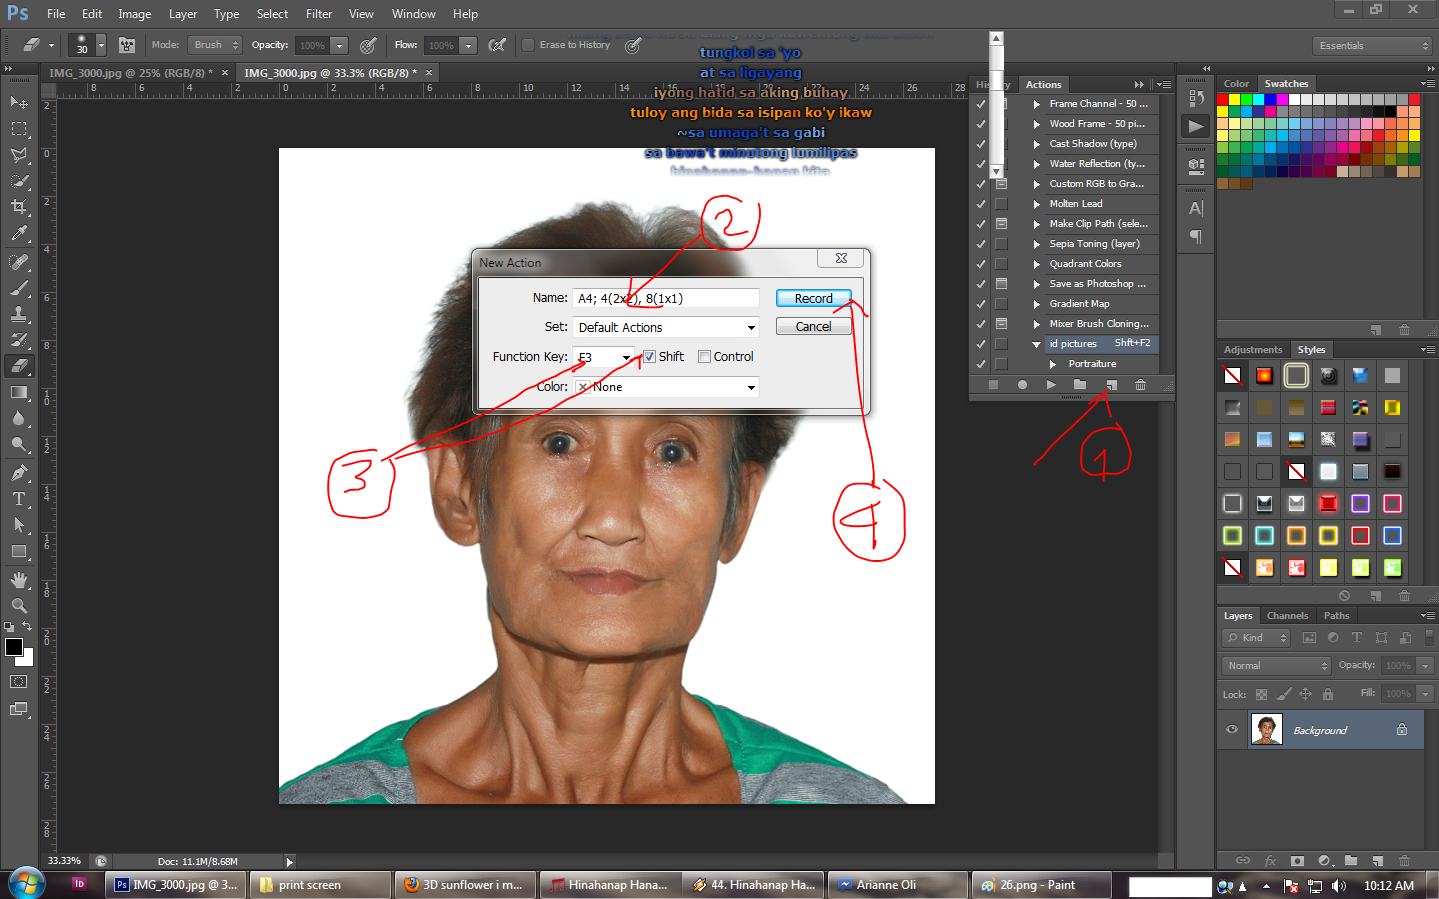 How To Make An Id Picture 2x2 1x1 In Adobe Photoshop Cs 6 For For